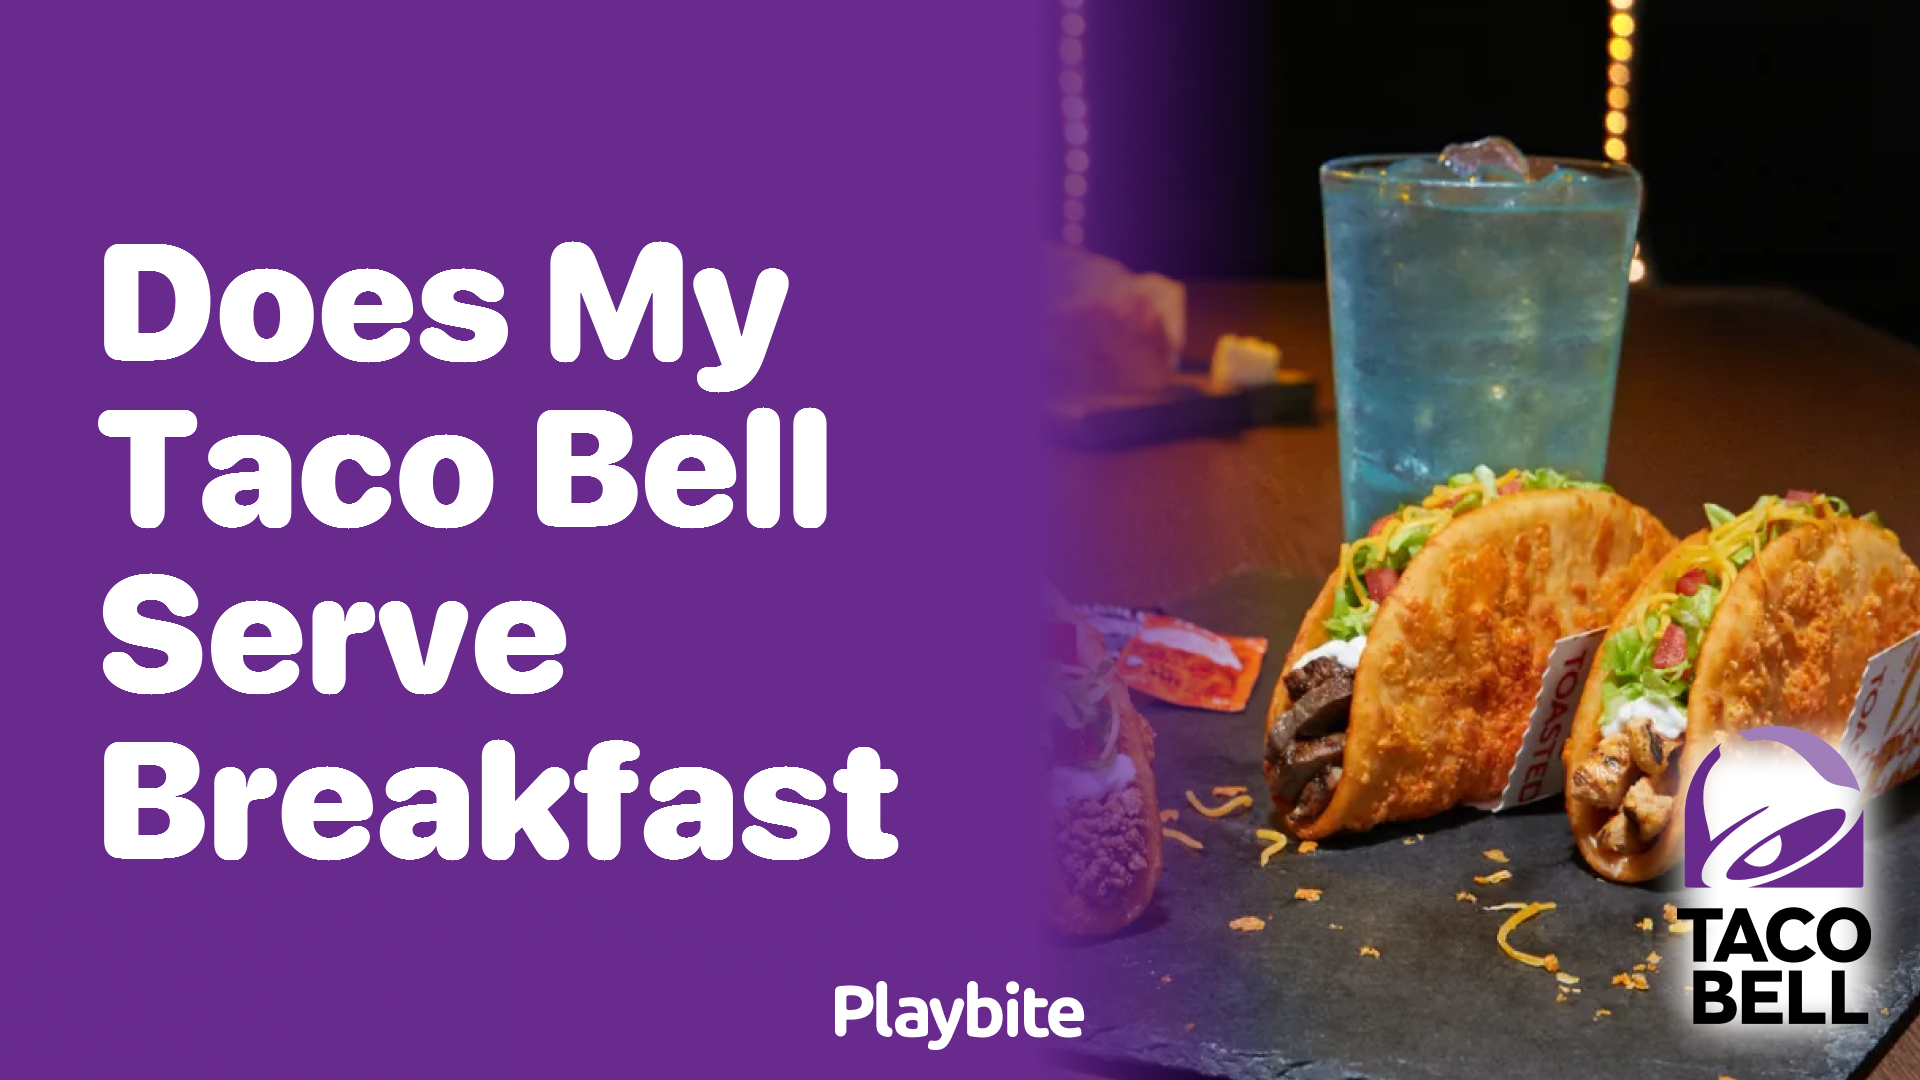 Does My Taco Bell Serve Breakfast? Find Out Here!